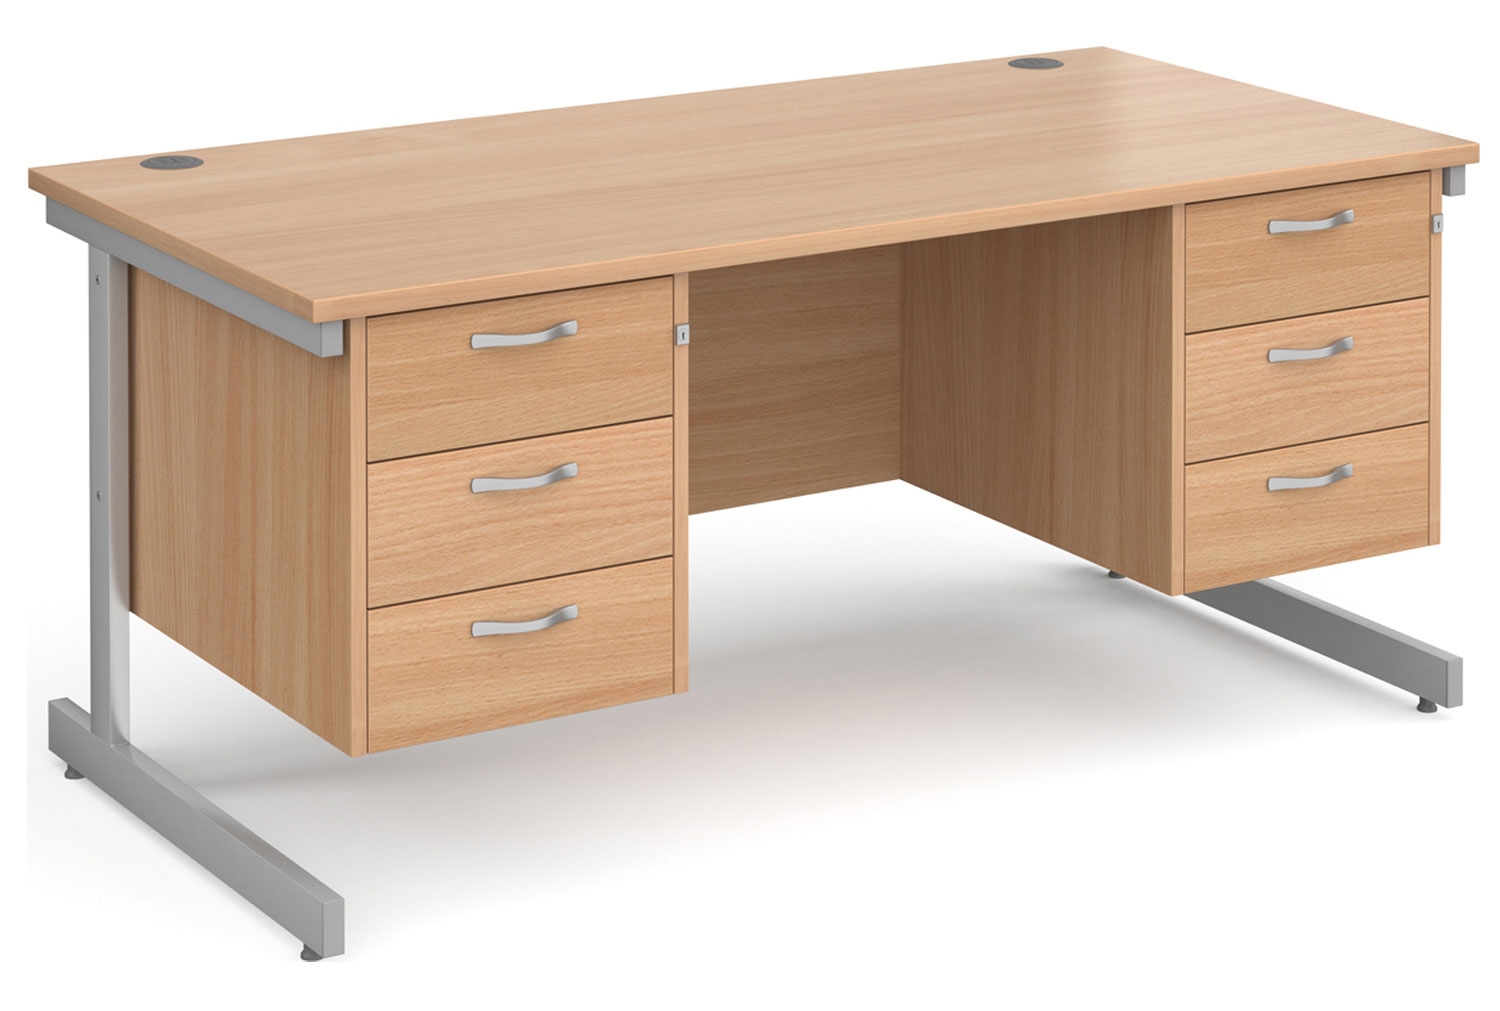 Thrifty Next-Day Rectangular Office Desk 3+3 Drawers Beech, 160wx80dx73h (cm), Express Delivery